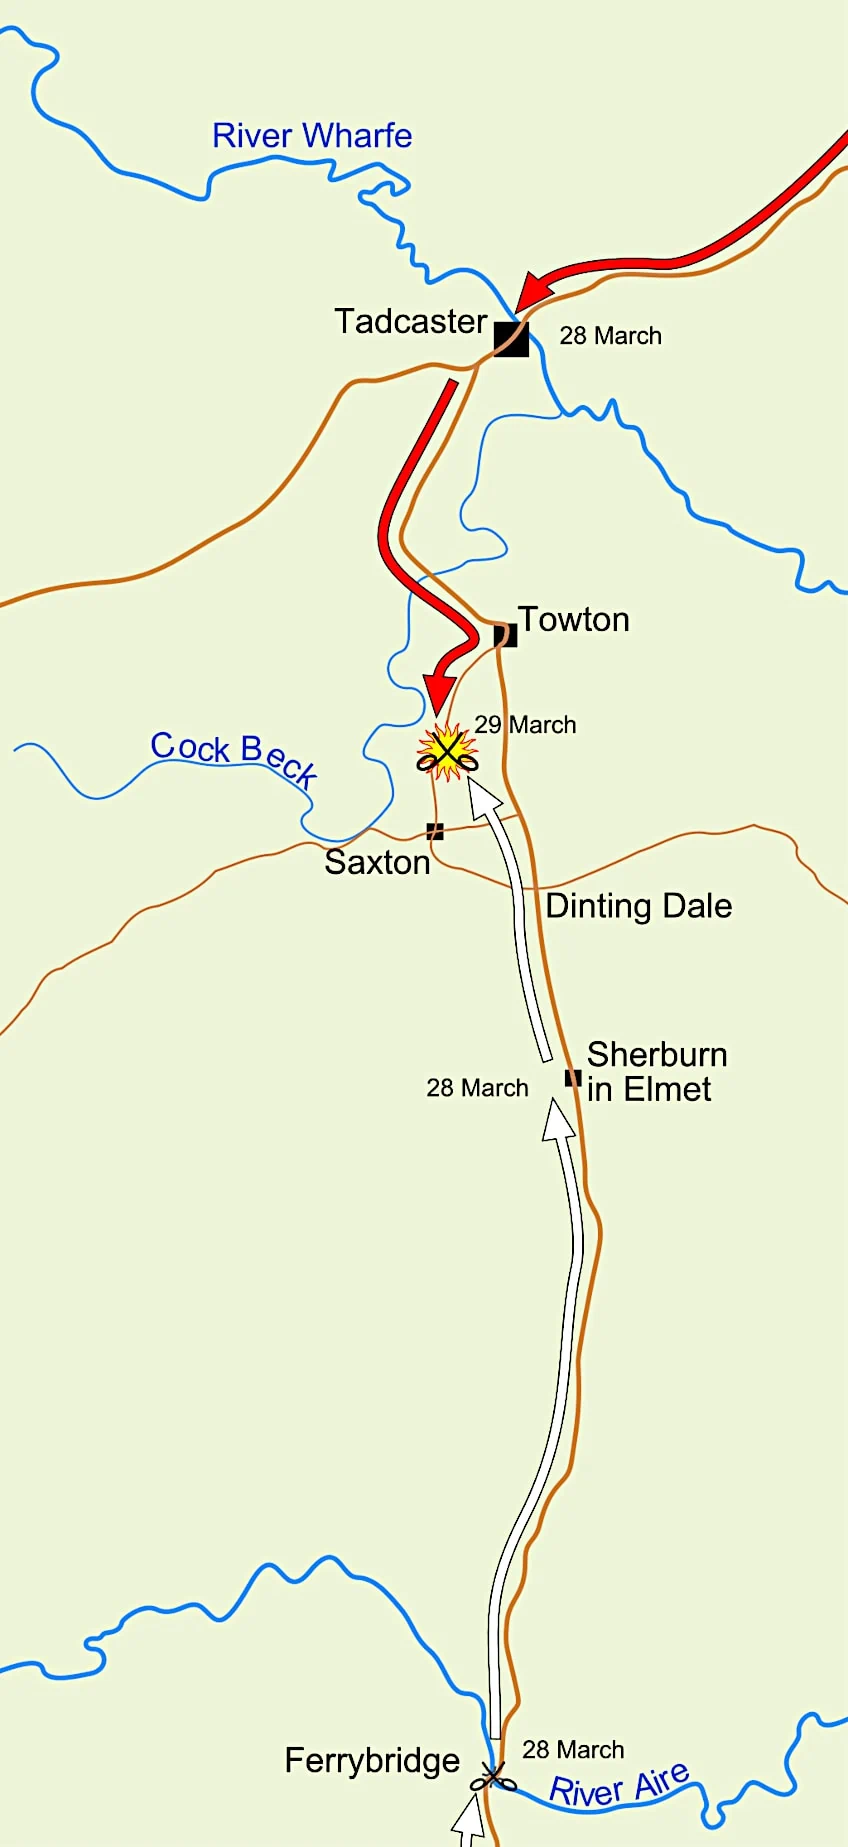 Build-Up to Battle of Towton